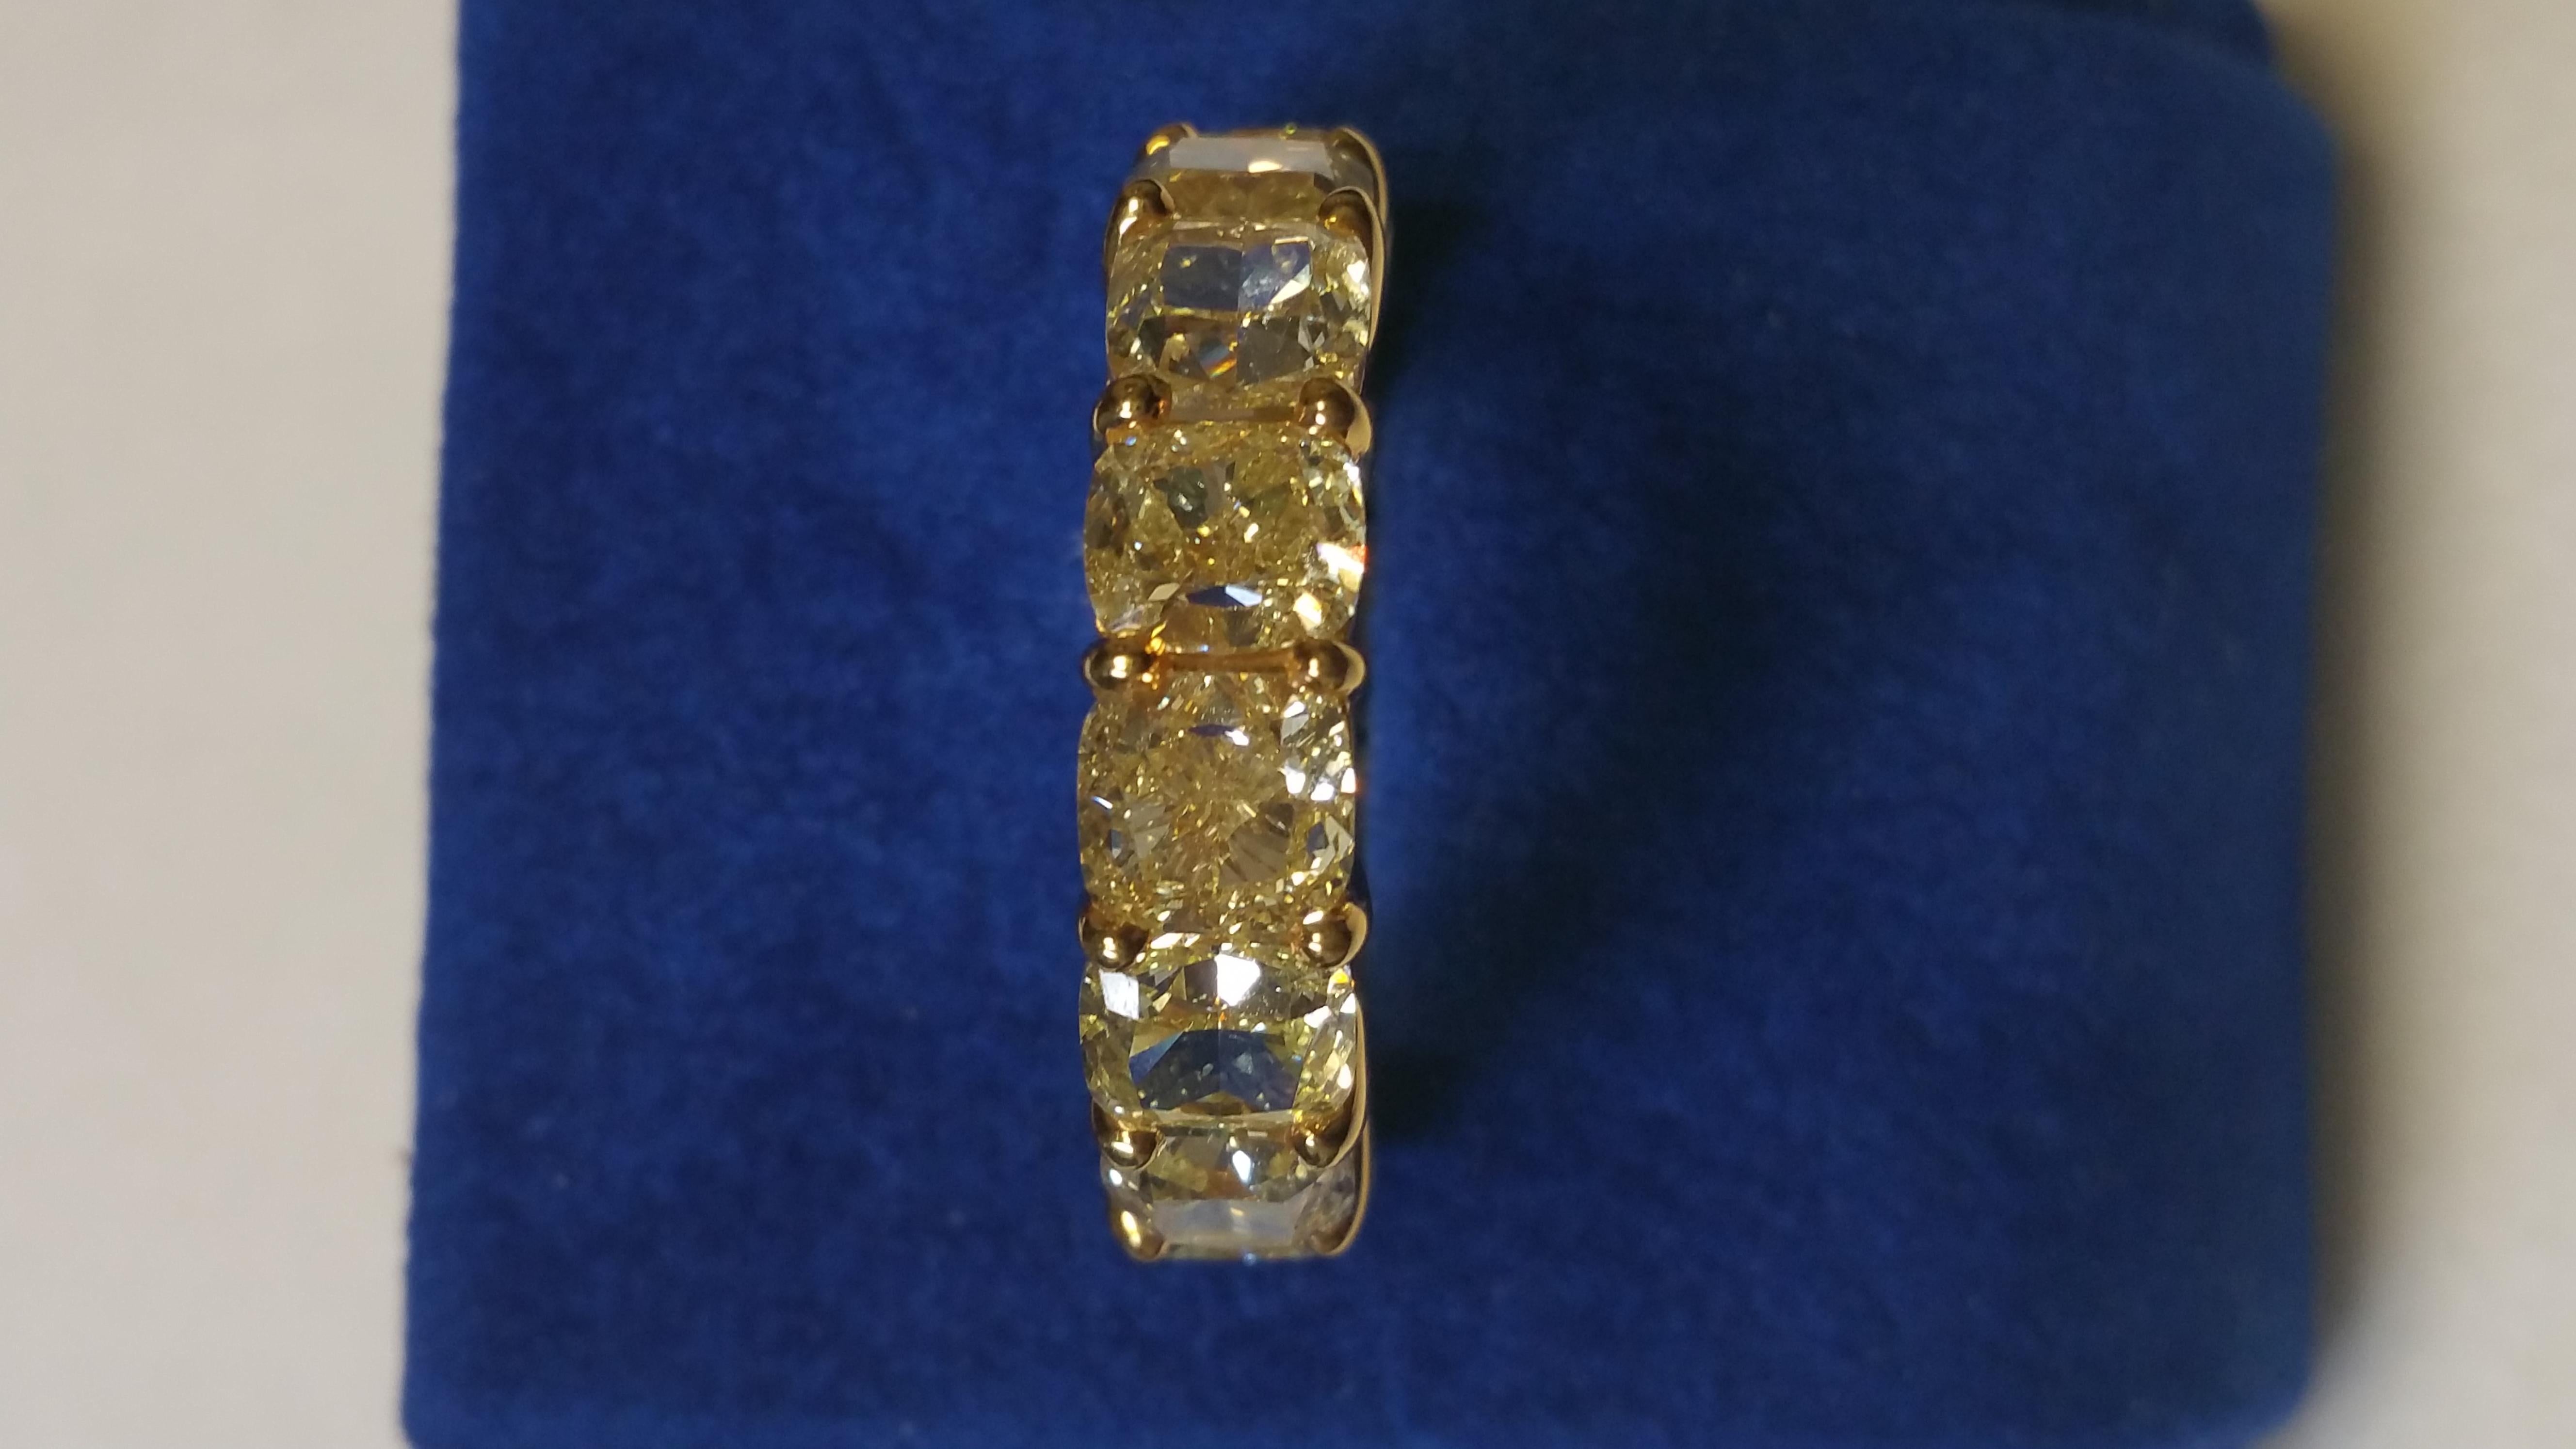 This Fancy Intense Yellow Cushion Cut Eternity band is a pleasure to wear every day and contains 11.60  carats of natural fancy  yellow diamonds of VVS2 - SI1 clarity in 18 karat yellow gold.  It is size 6 and is unusual in the marketplace  This